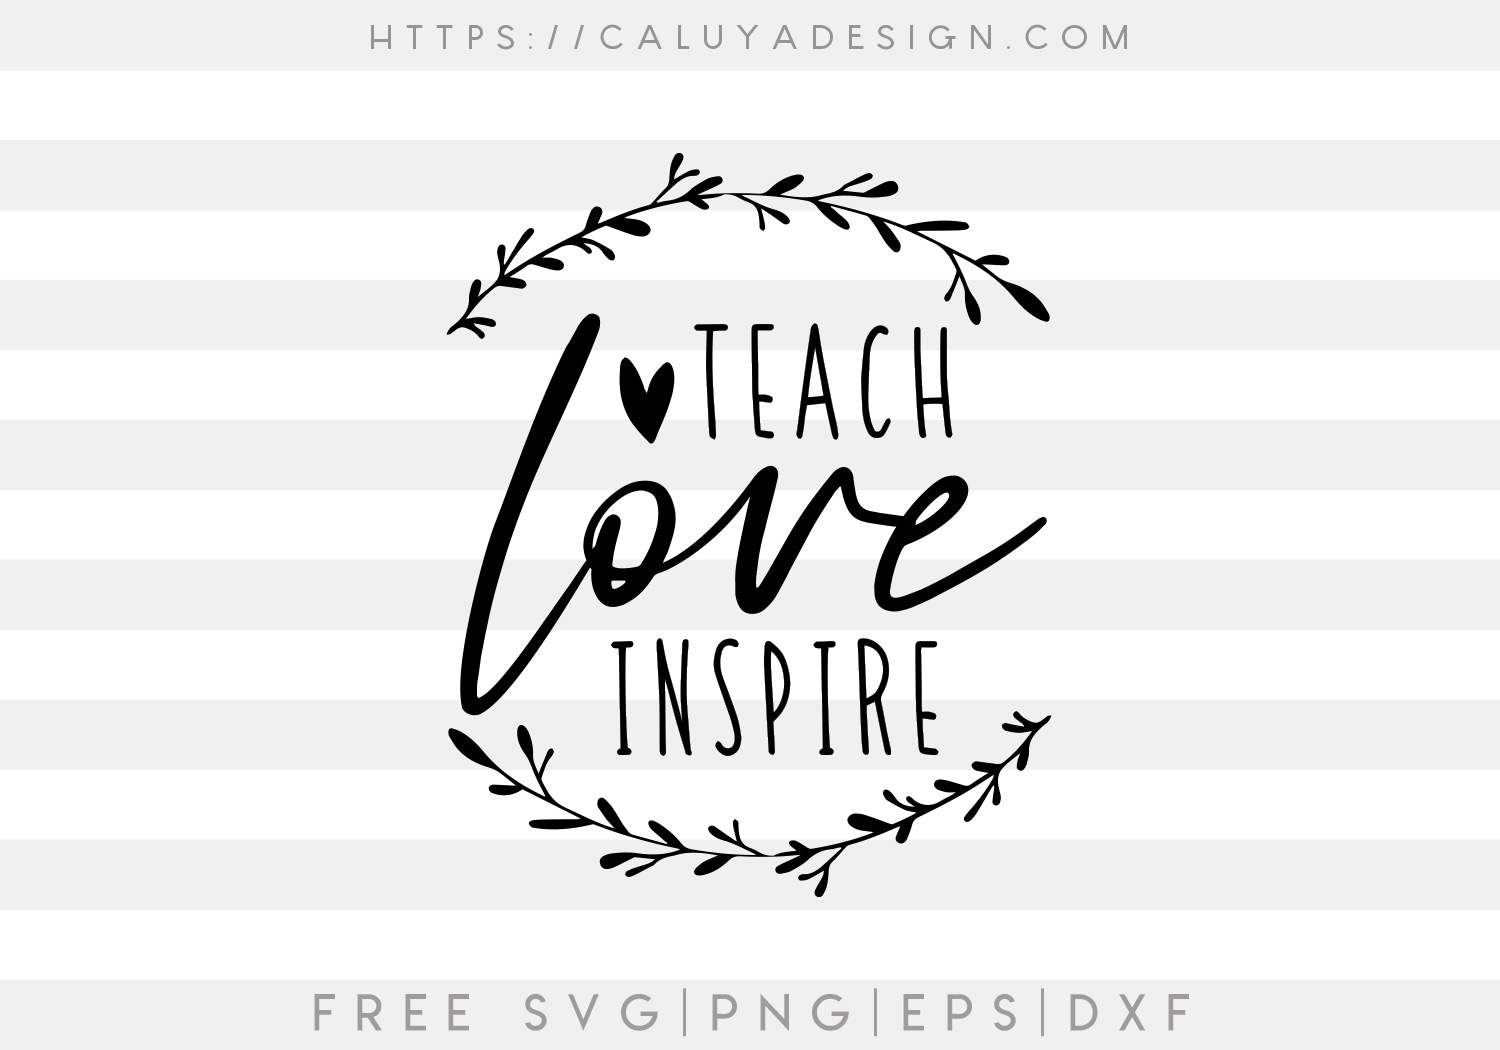 includes svg, png, dxf, eps, jpg file formats Teach love inspire file for cutting and sublimation print